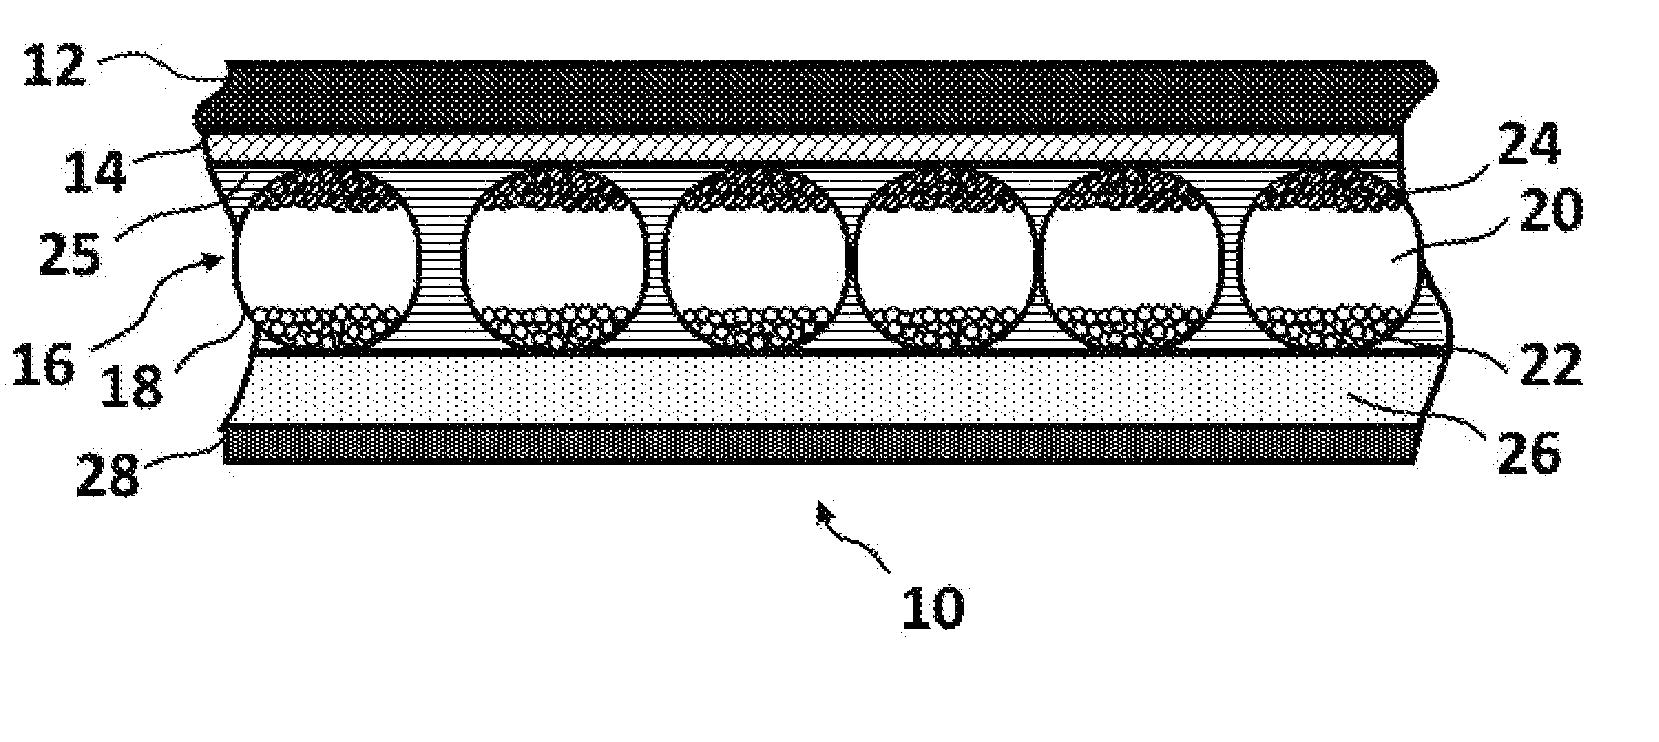 Controlled polymeric material conductivity for use in a two-phase electrode layer